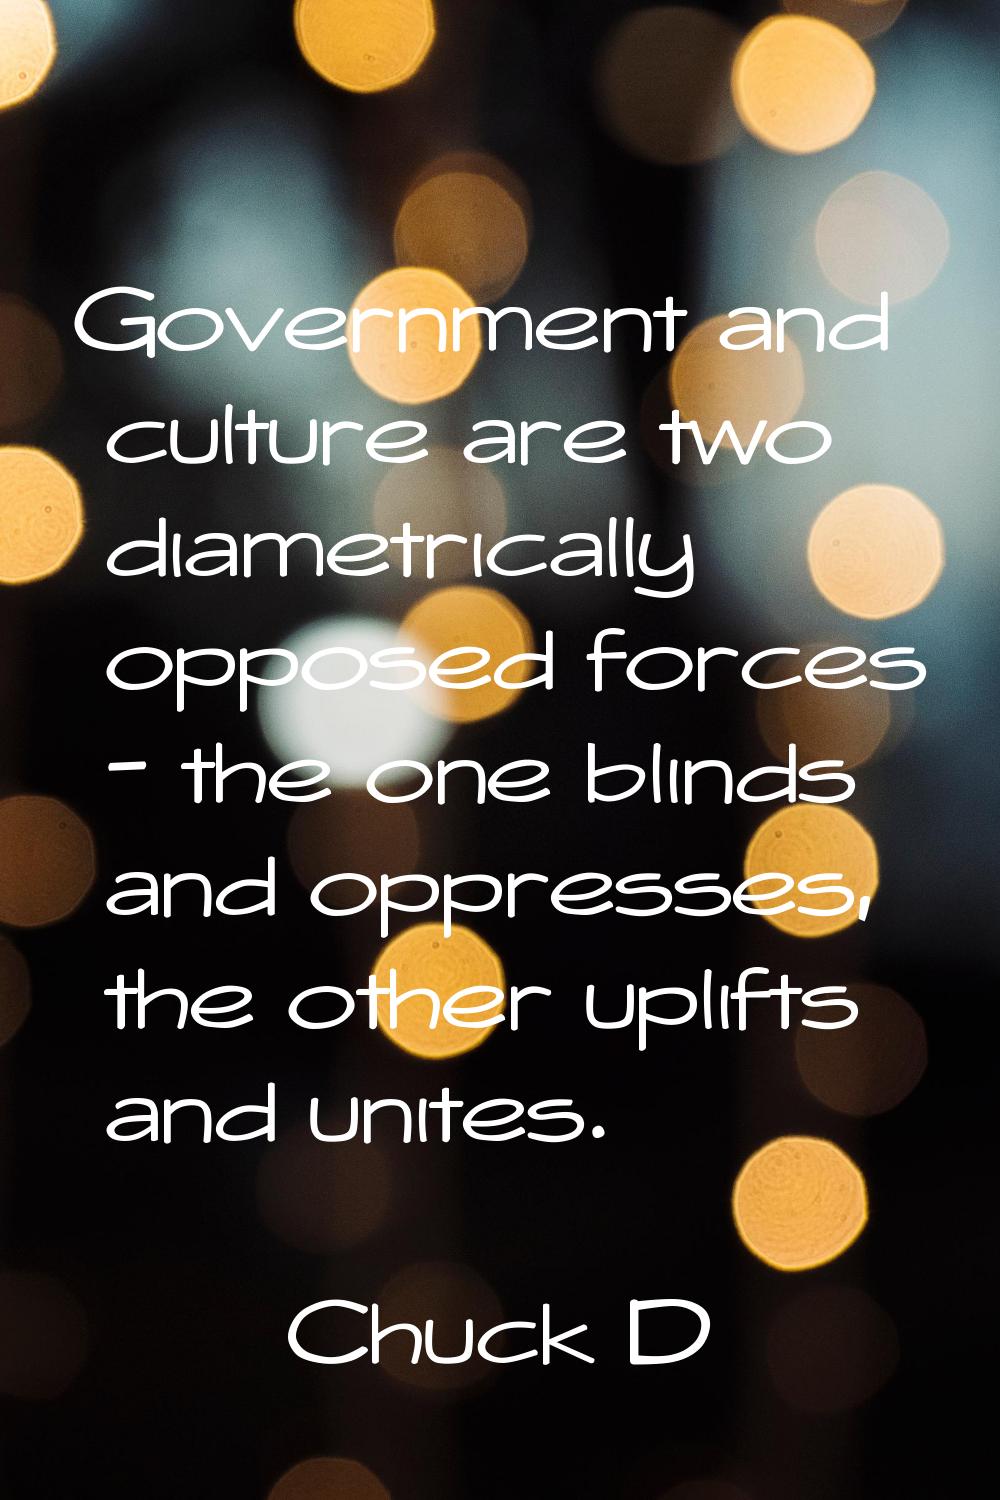 Government and culture are two diametrically opposed forces - the one blinds and oppresses, the oth